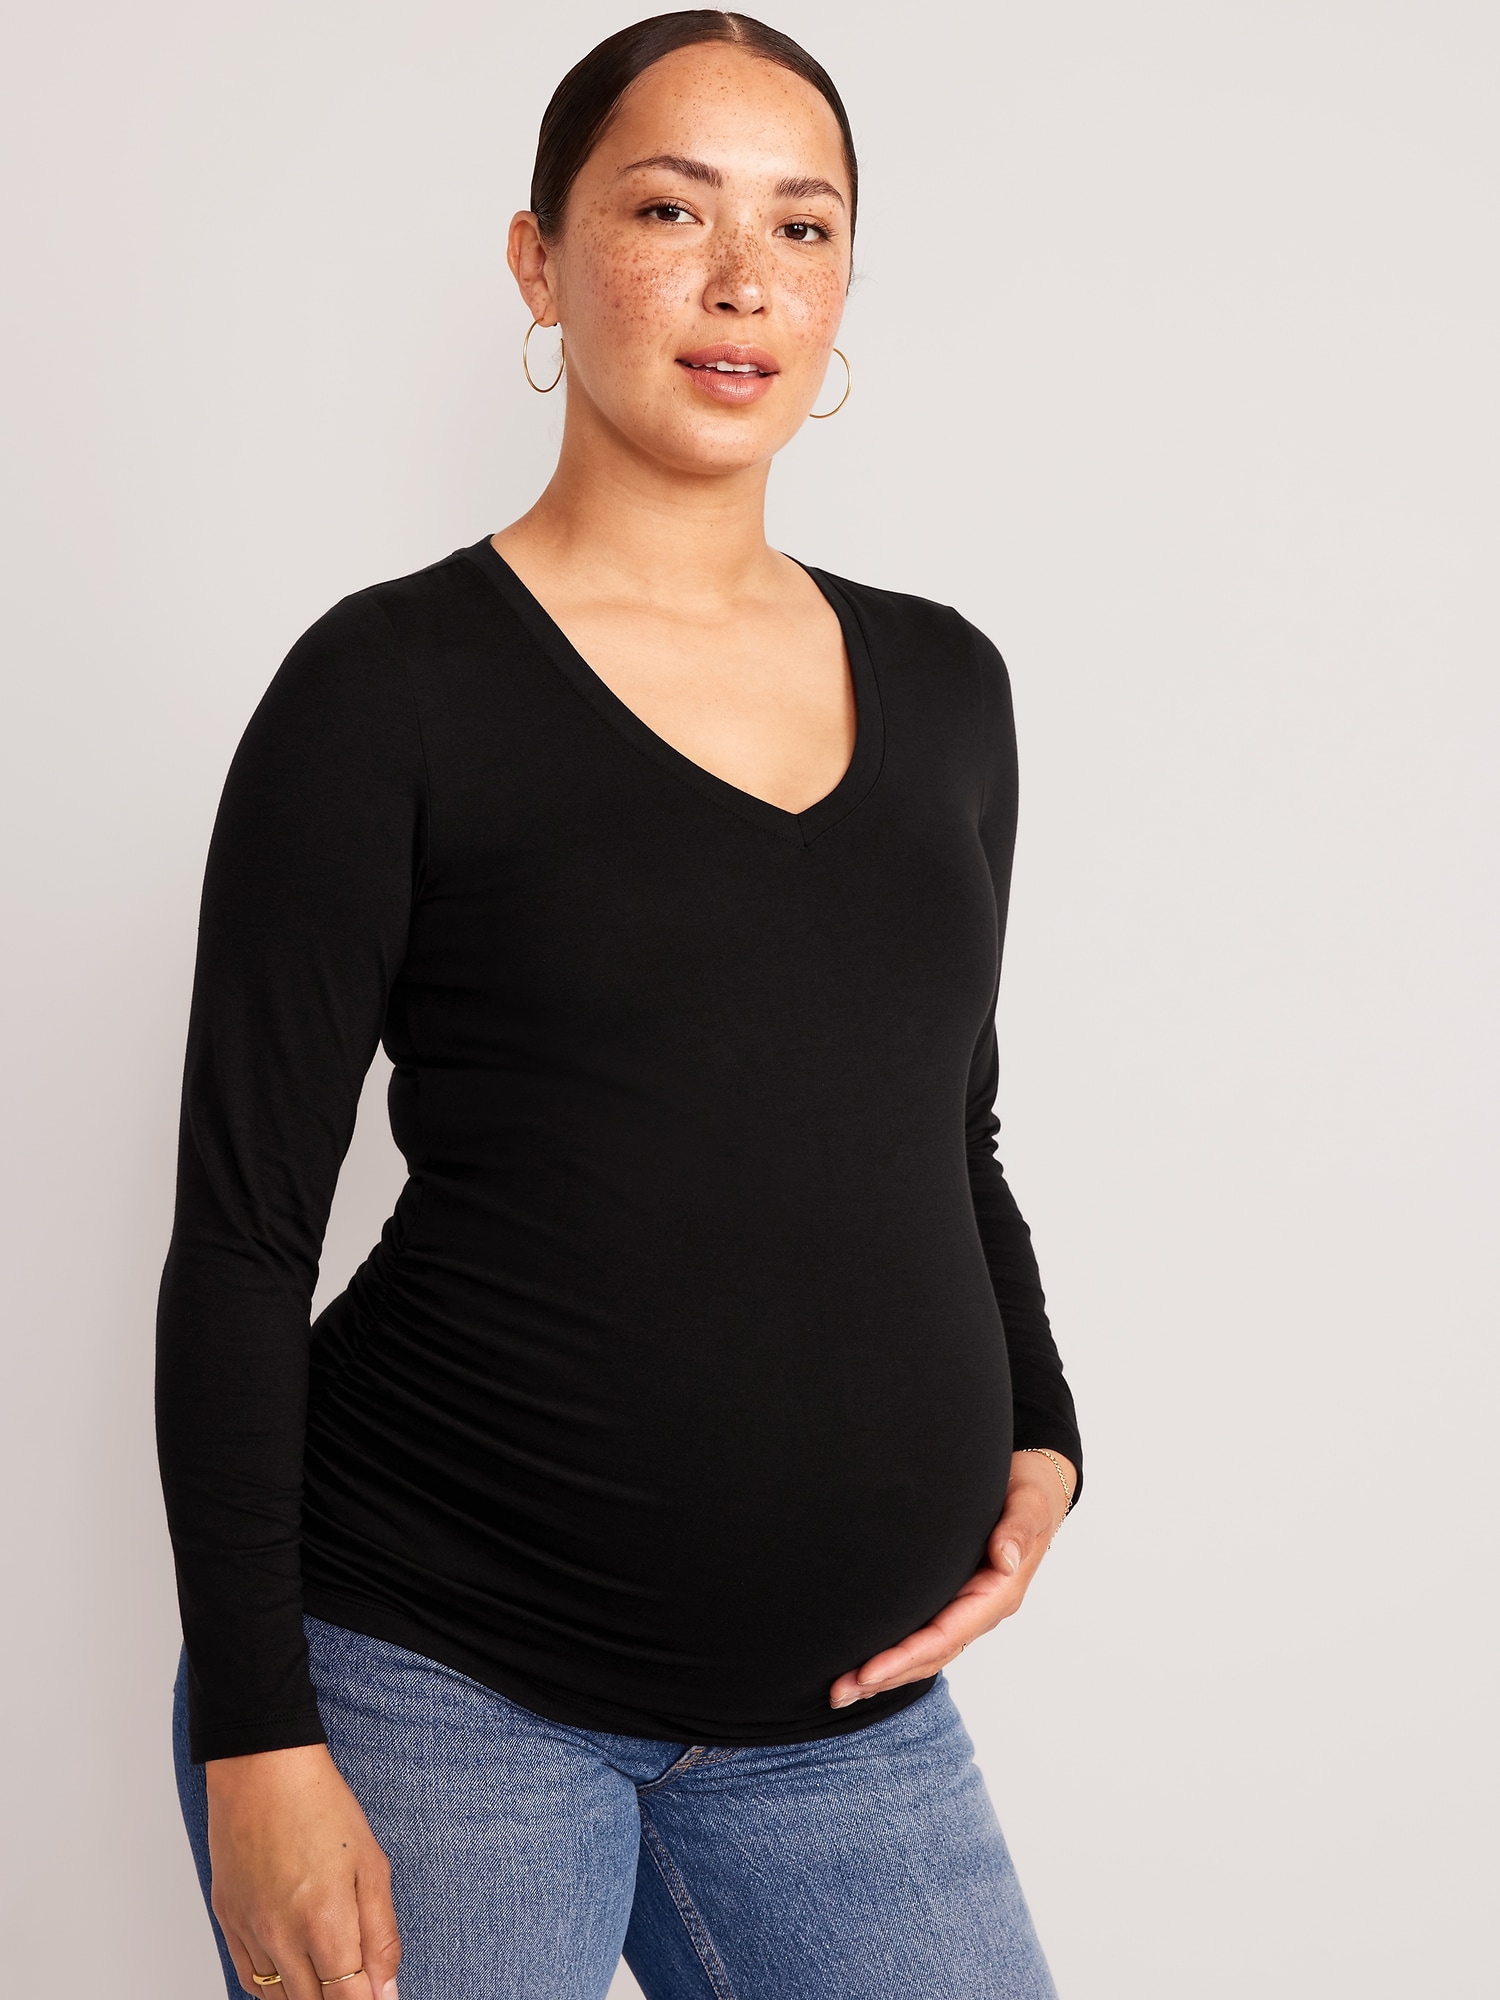 Everyday Maternity Clothes